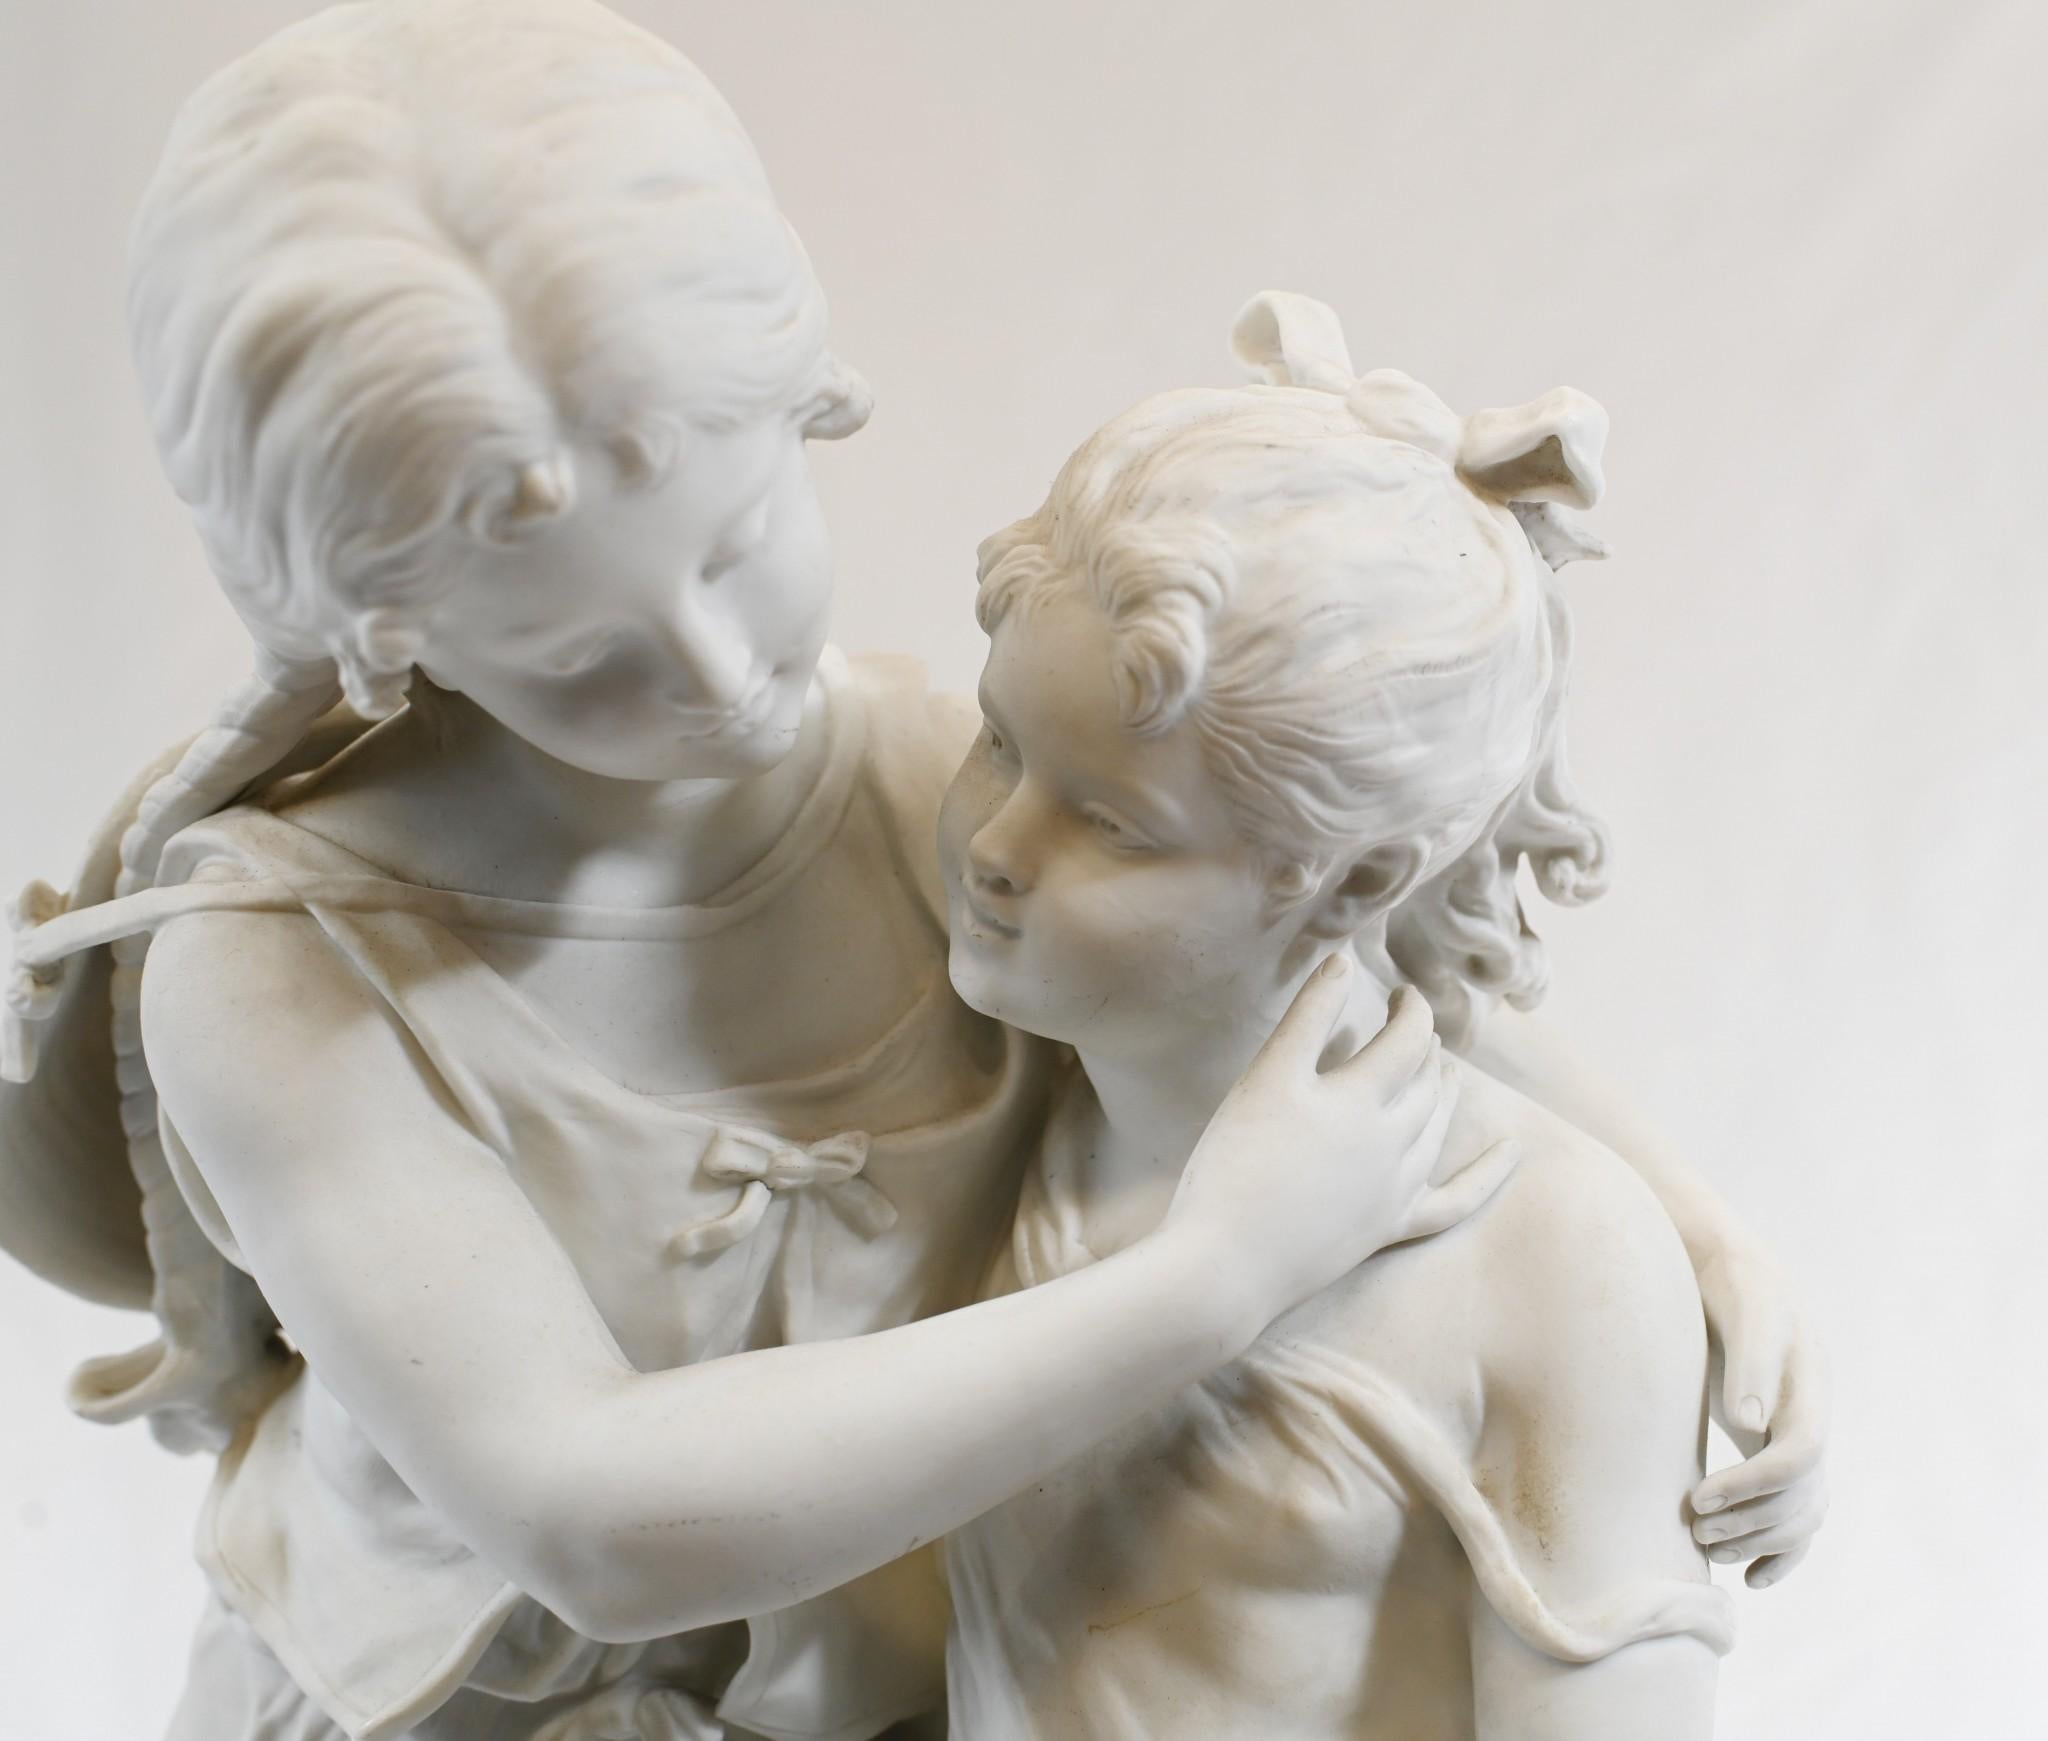 Gorgeous antique French biscuit Parian porcelain statue of a pair of girls
Statue is by August Moreau, the famous French sculpturist and we date this to circa 1880
Parian is made of biscuit porcelain
With its white color, the material makes an